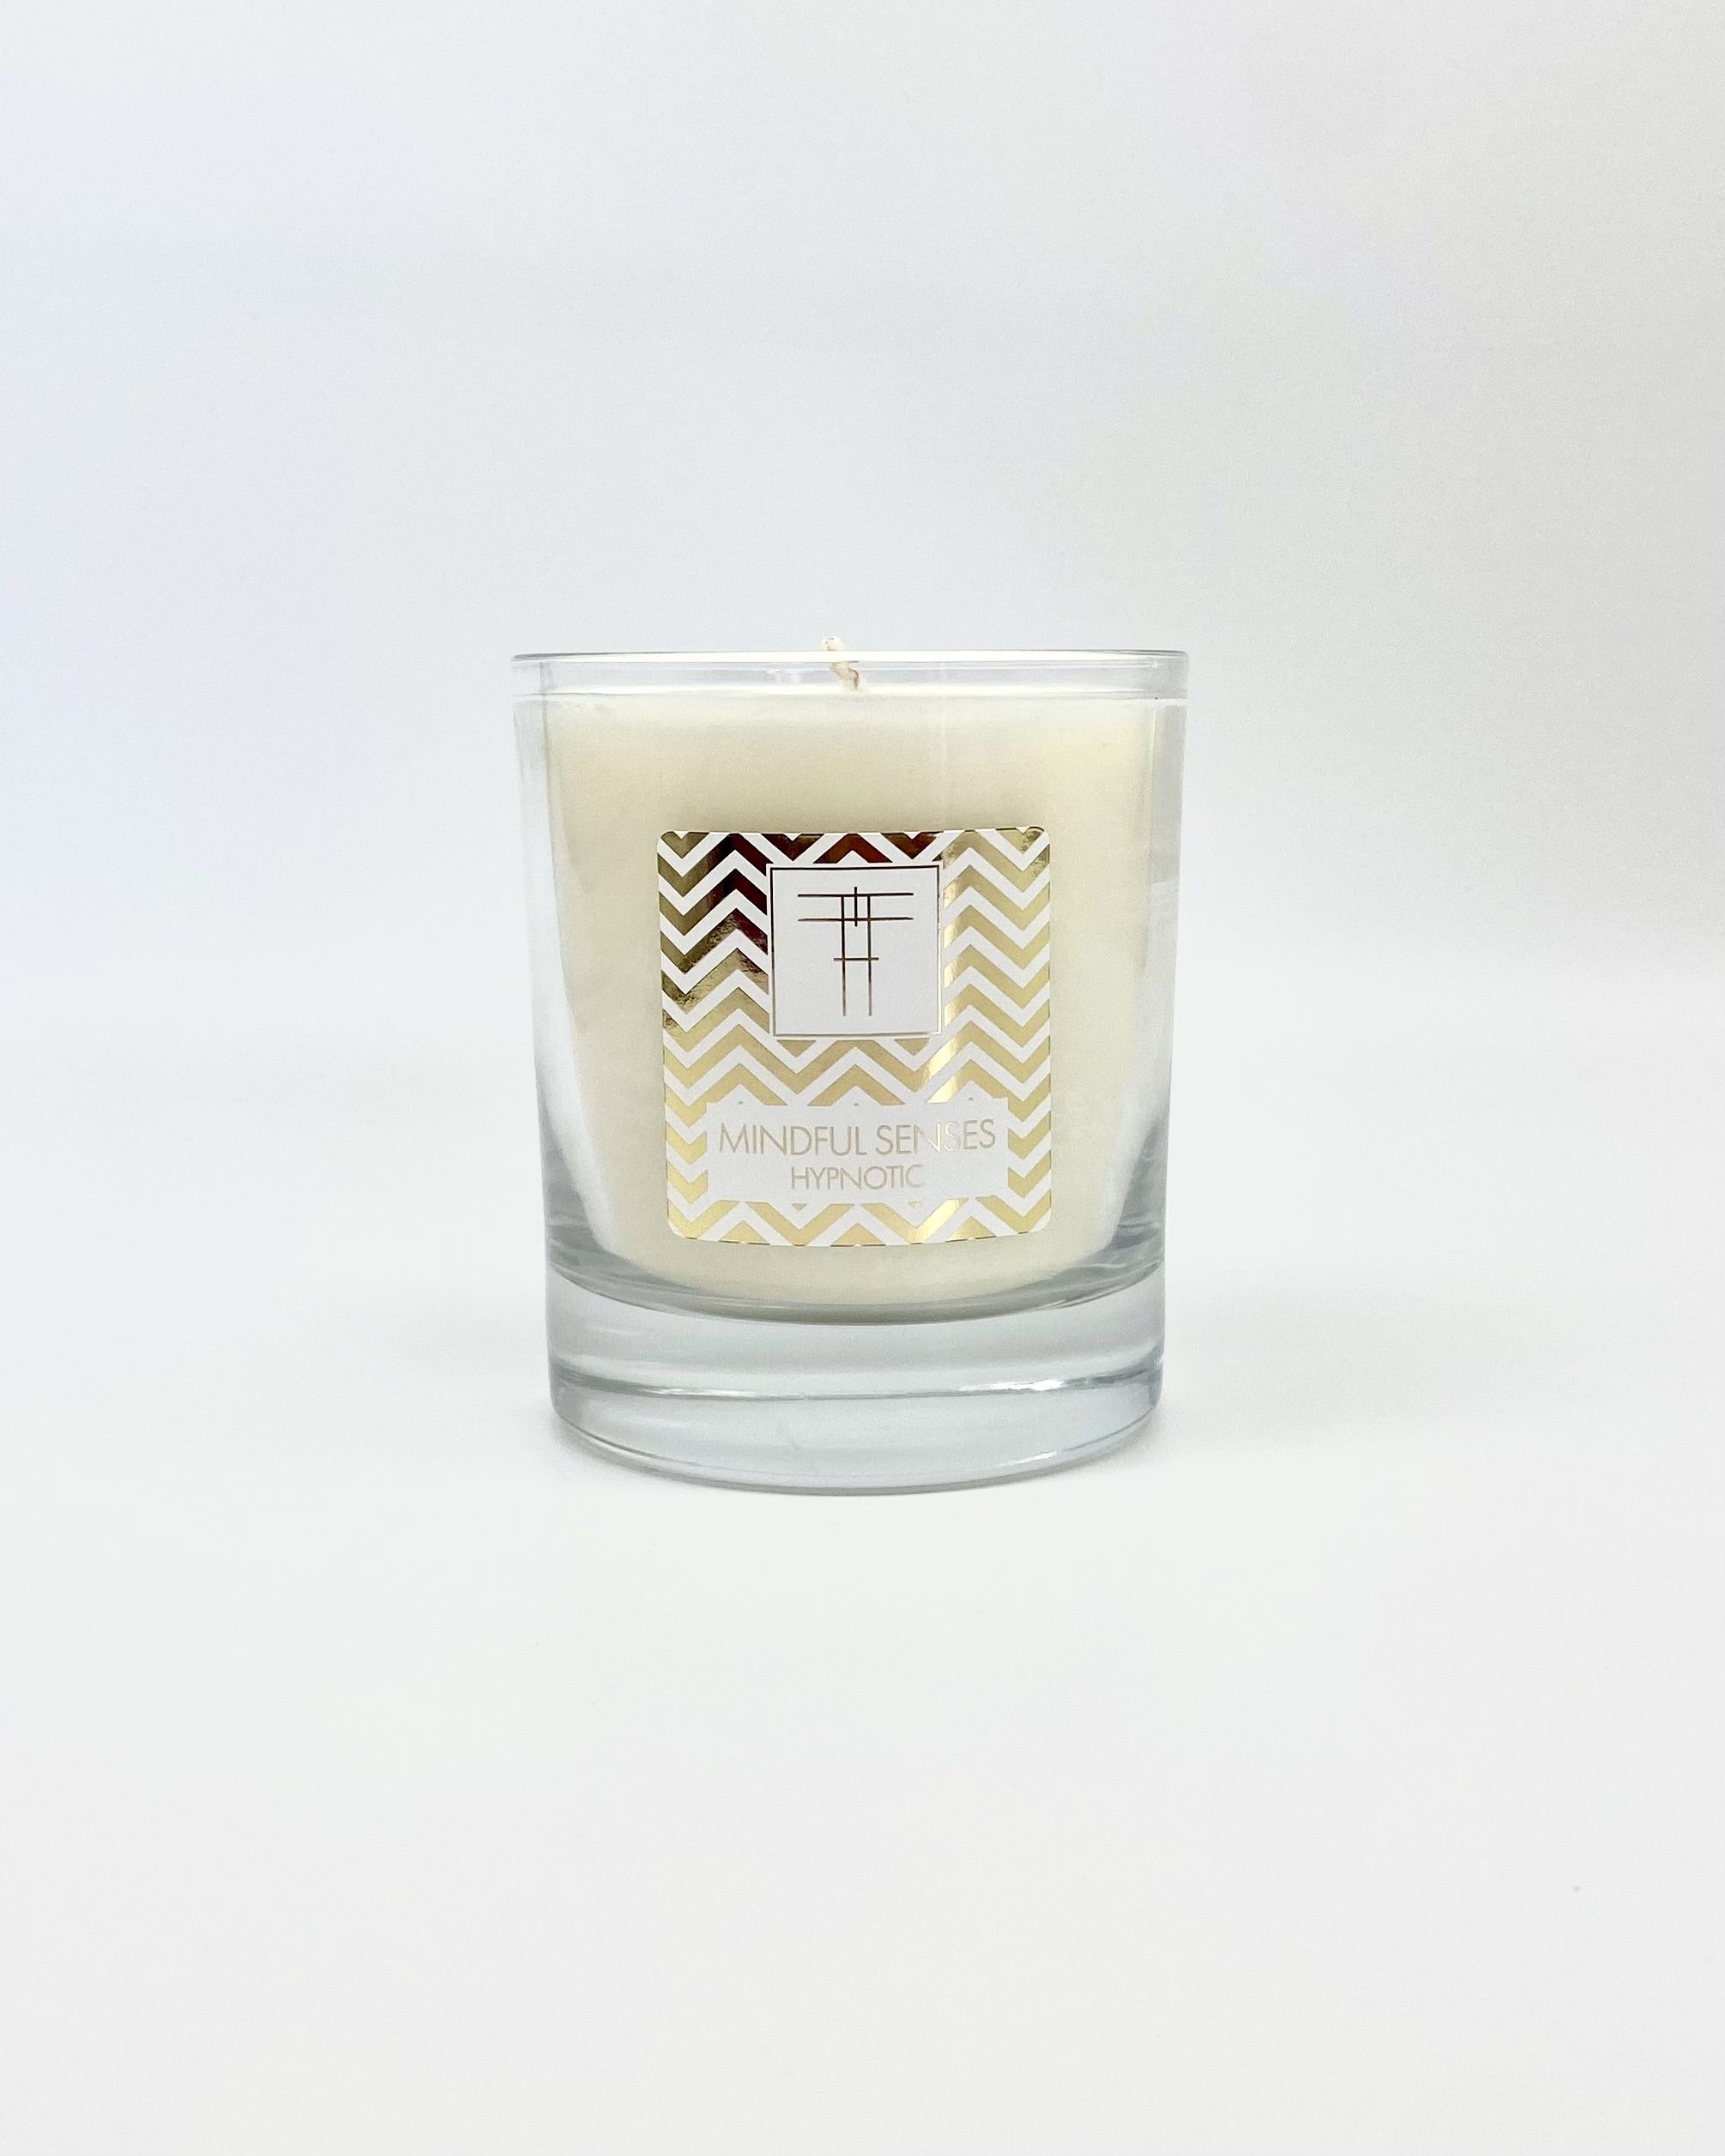 Created to create a calm and restorative environment, Mindful Senses Candle are emotive triggers of colour, scent and mood. Take a sensuous journey and quiet the distracting static brought fourth by the stresses of life with this expansive and transcendental candle. 

Notes of jasmine, gardenia, neroli, amber, frankincense, vanilla and sandalwood grace the sense like a warmbath, allowing your mind and soul to reach an inner peace.

100% Natural organic soy wax.

100% Britsh designed,crafted and manufactured.

Size 300cl 45+ Hour burn time.